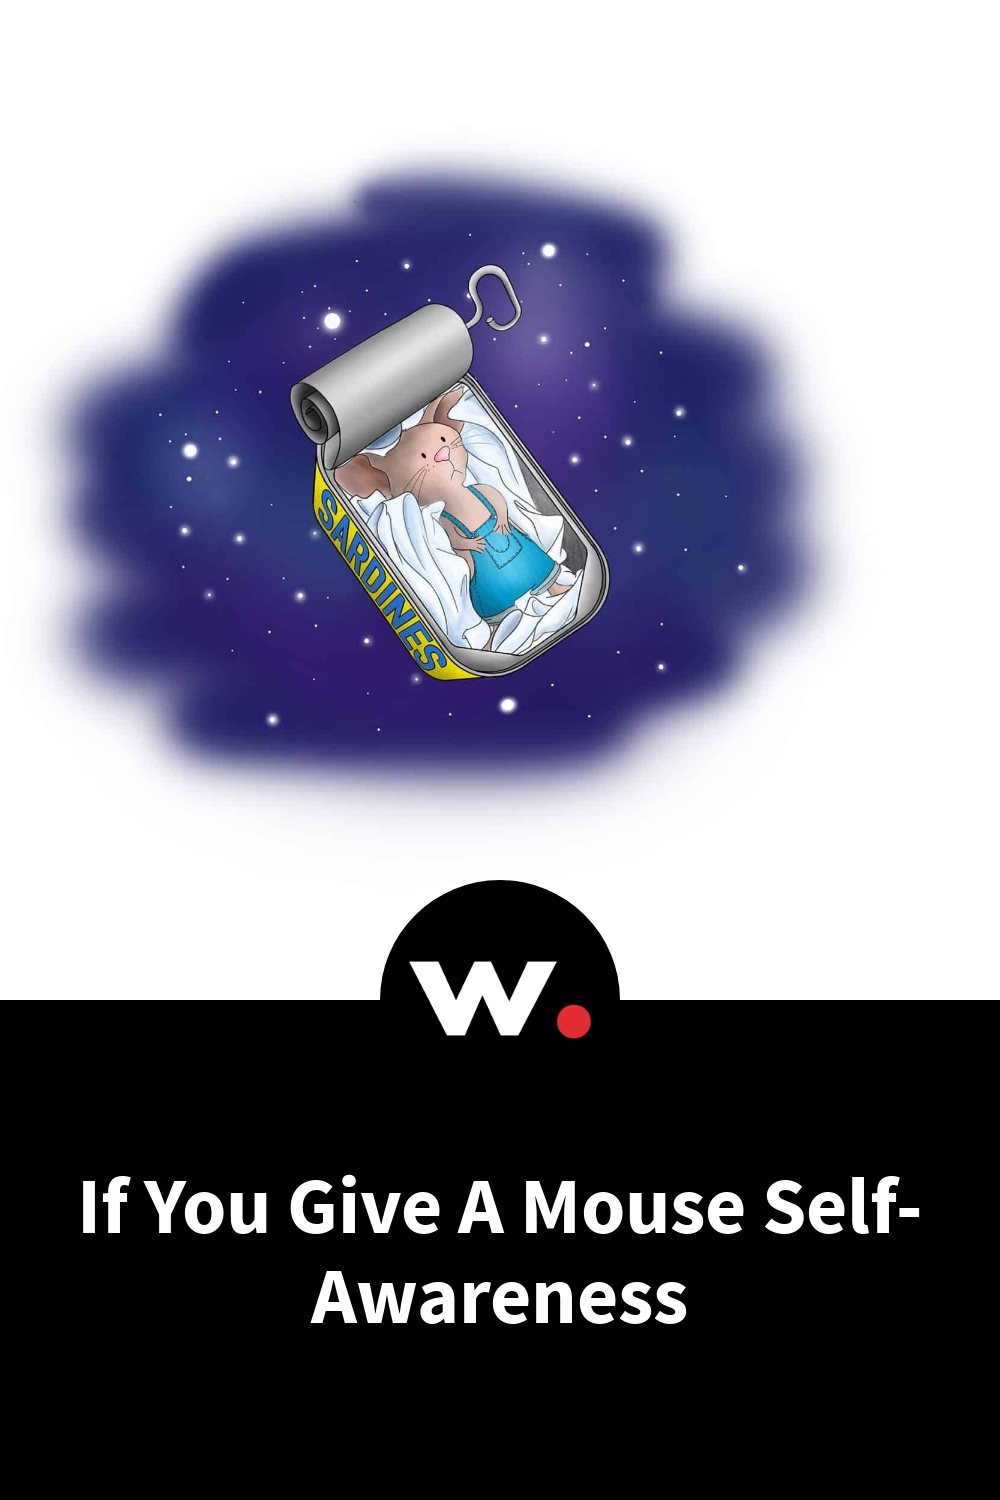 If You Give A Mouse Self-Awareness